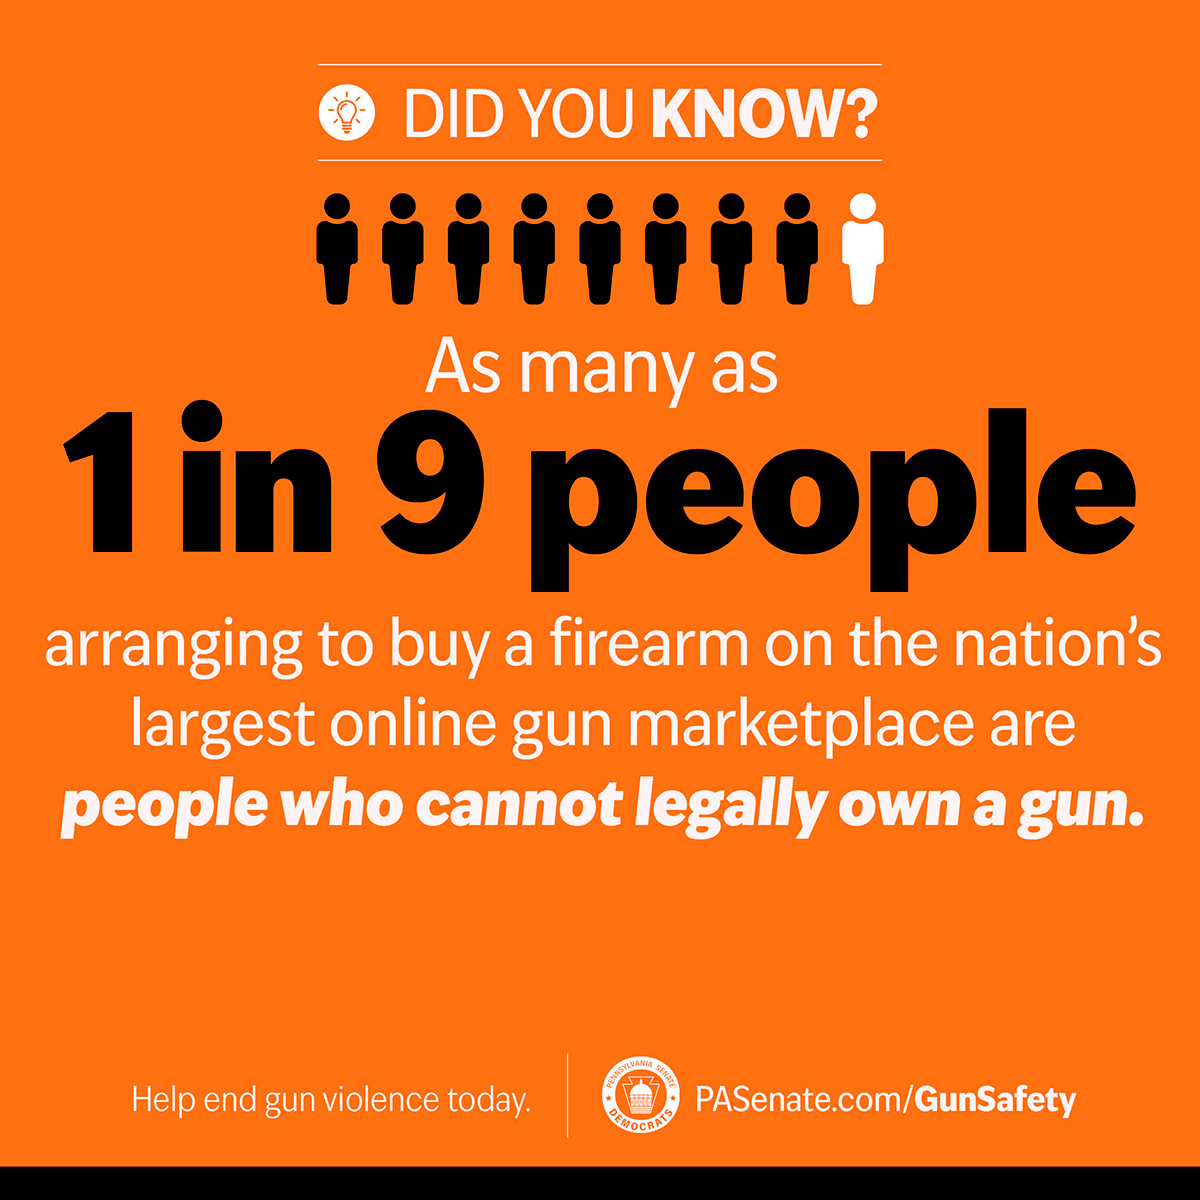 Did you know? As many as 1 in 9 arranging to buy a firearm on the nation's largest online gun marketplace are people who cannot legally own a gun.